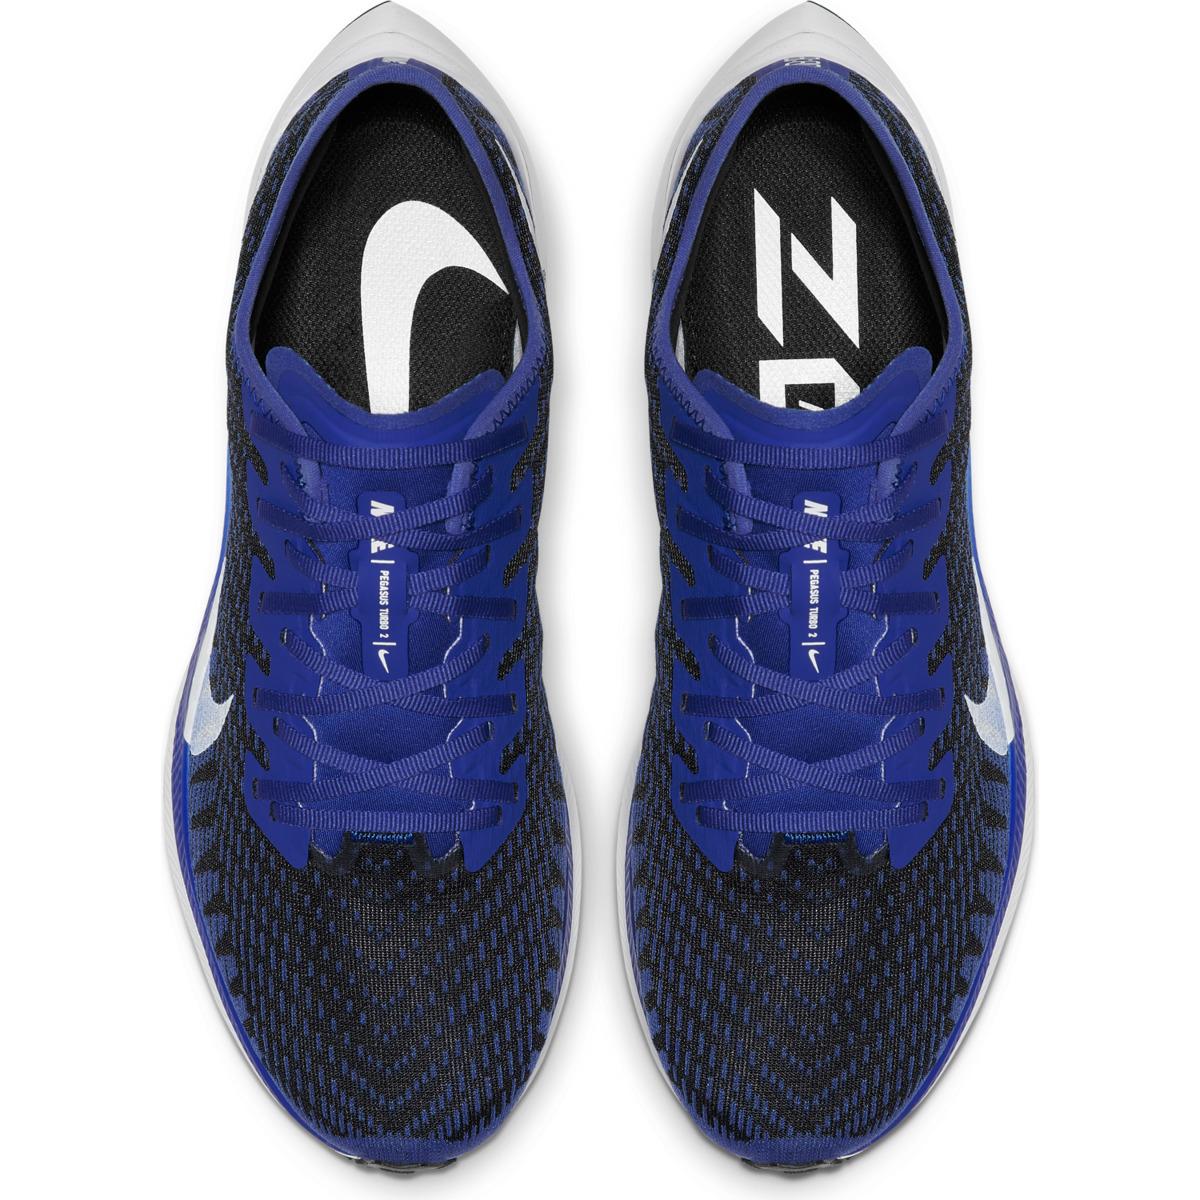 Nike Synthetic Zoom Pegasus Turbo 2 Running Shoe in Blue for Men - Lyst